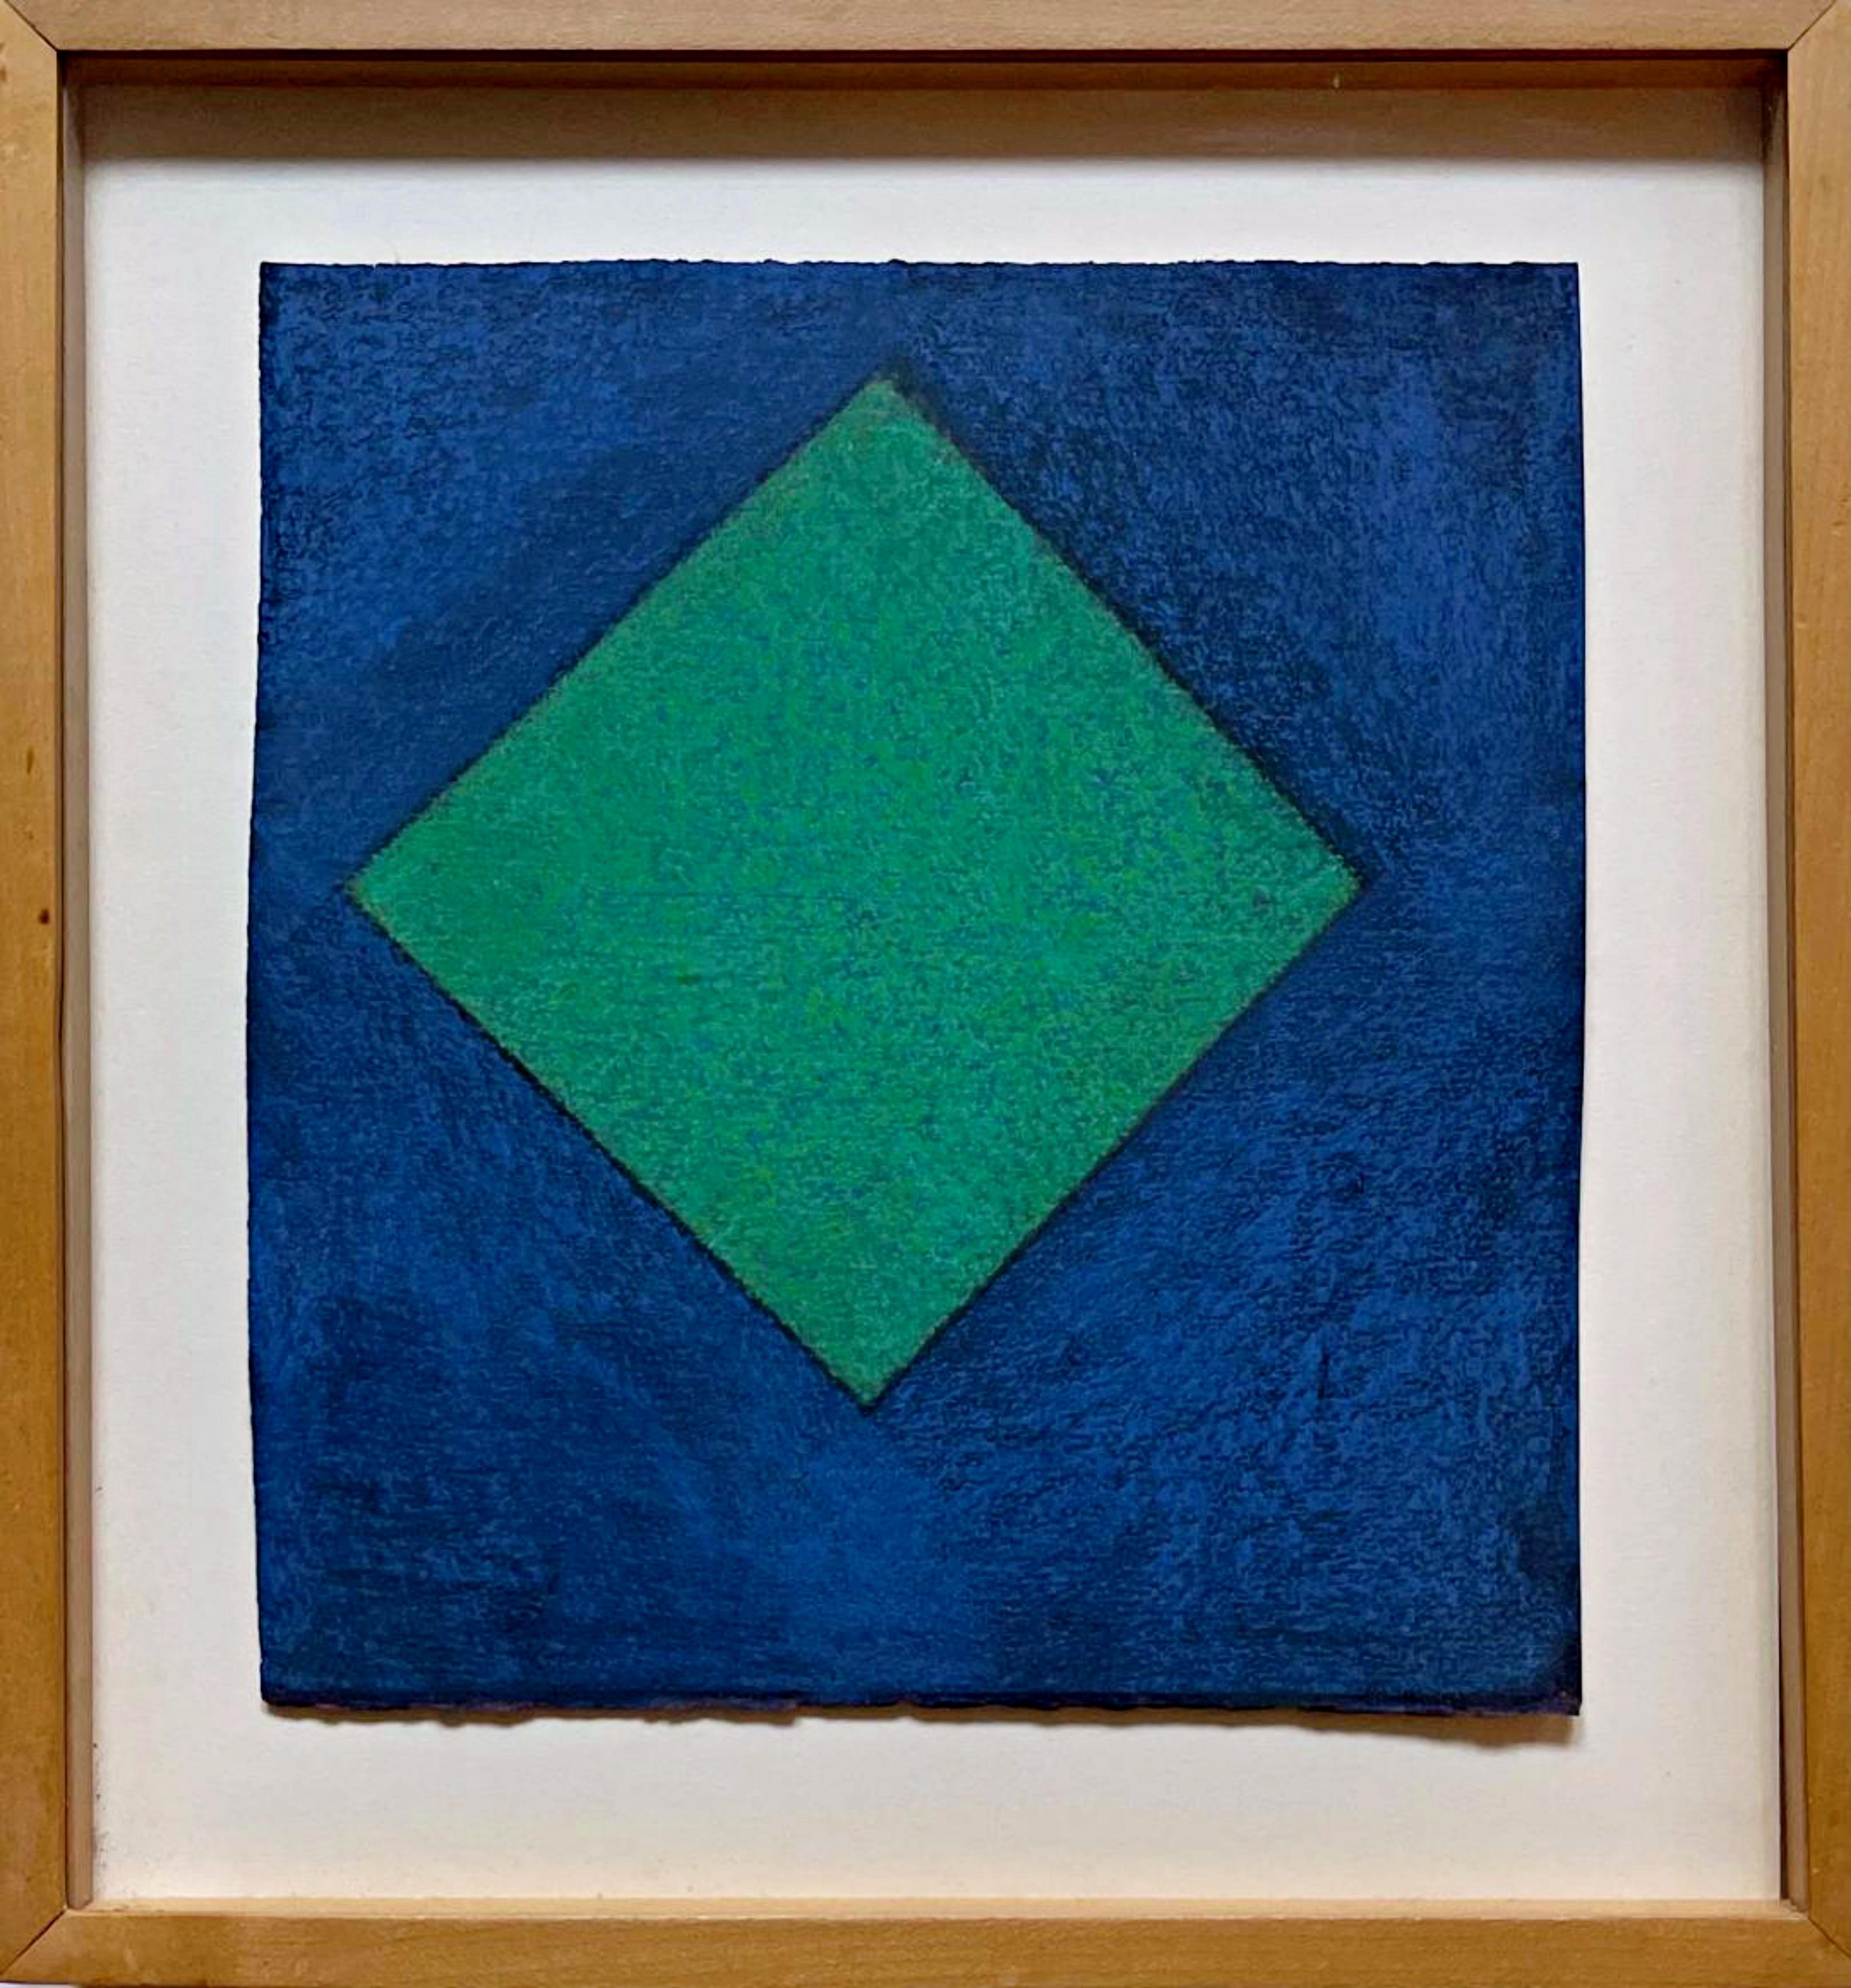 Untitled Geometric Abstraction Minimalist painting unique signed renowned artist - Abstract Geometric Painting by Winston Roeth